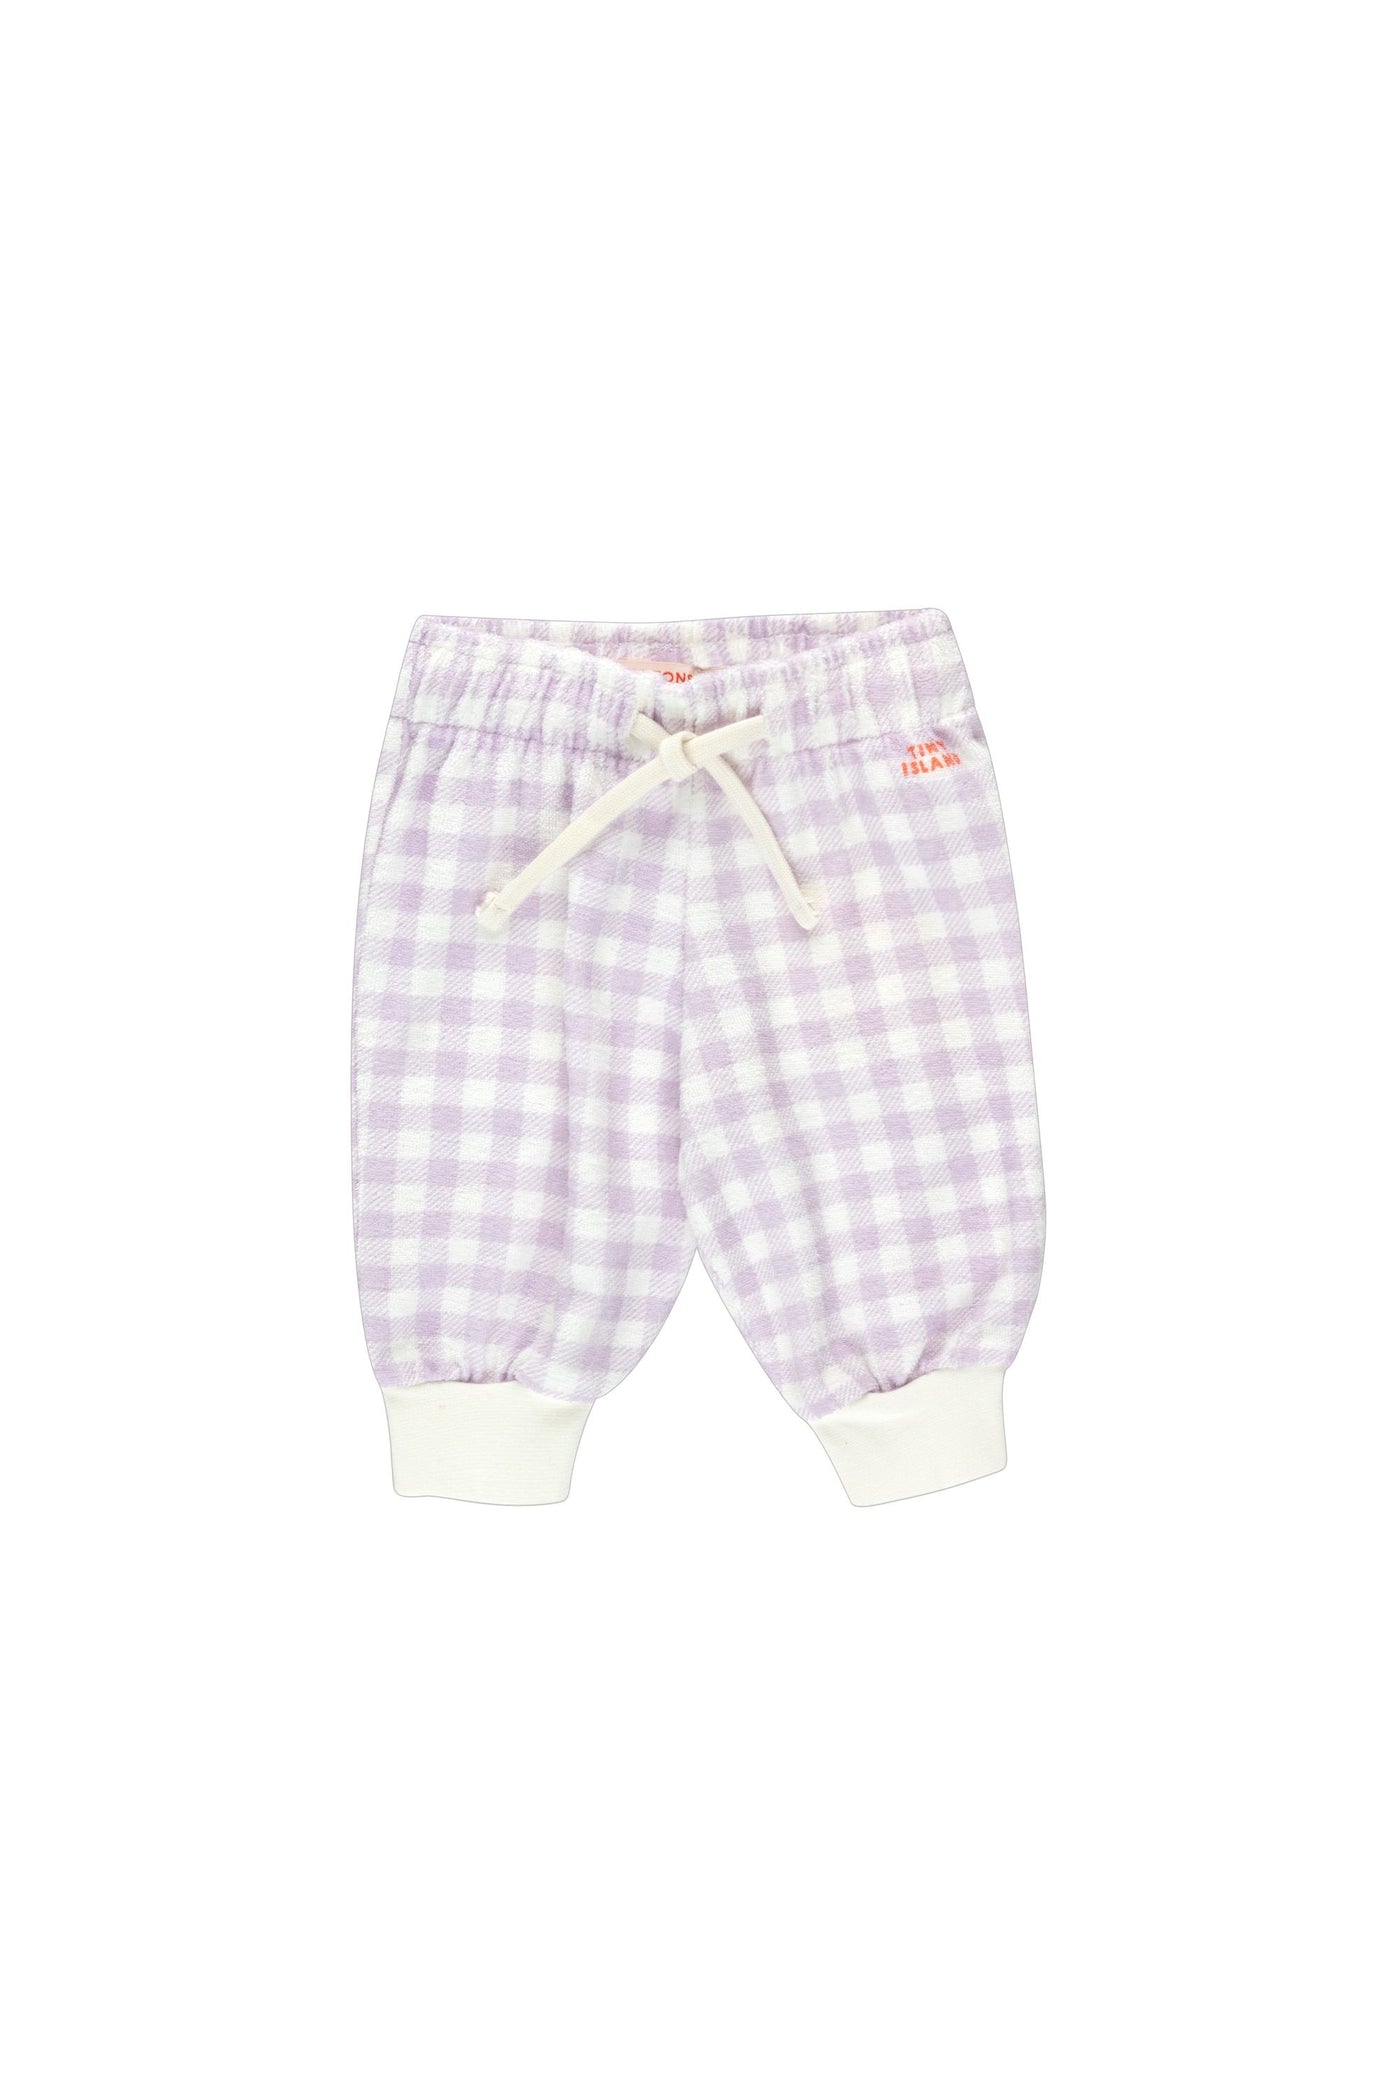 Vichy Baby Sweatpant in Pastel Lilac